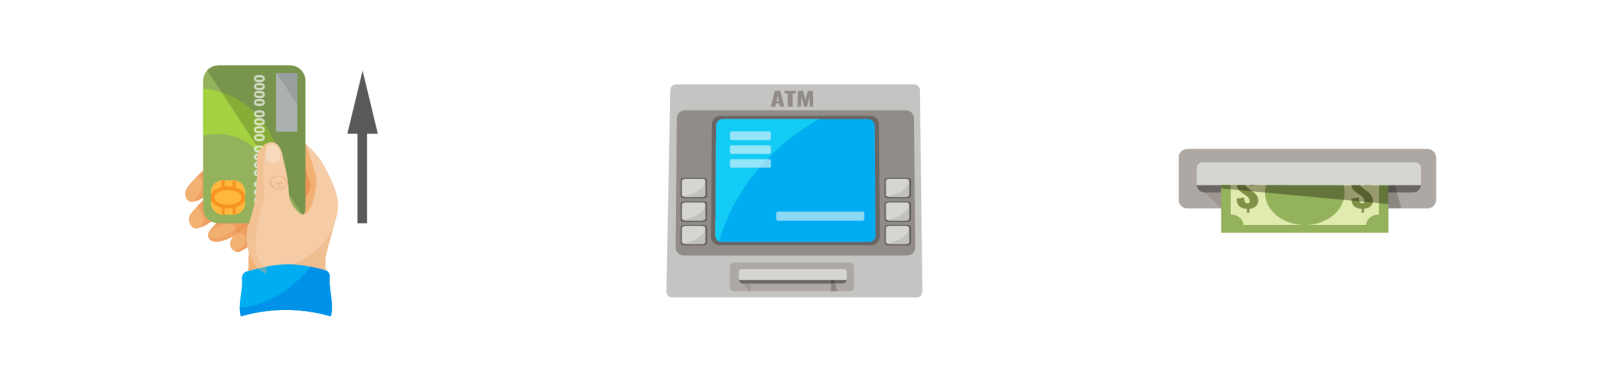 icons inserting card, looking at atm screen and depositing cash